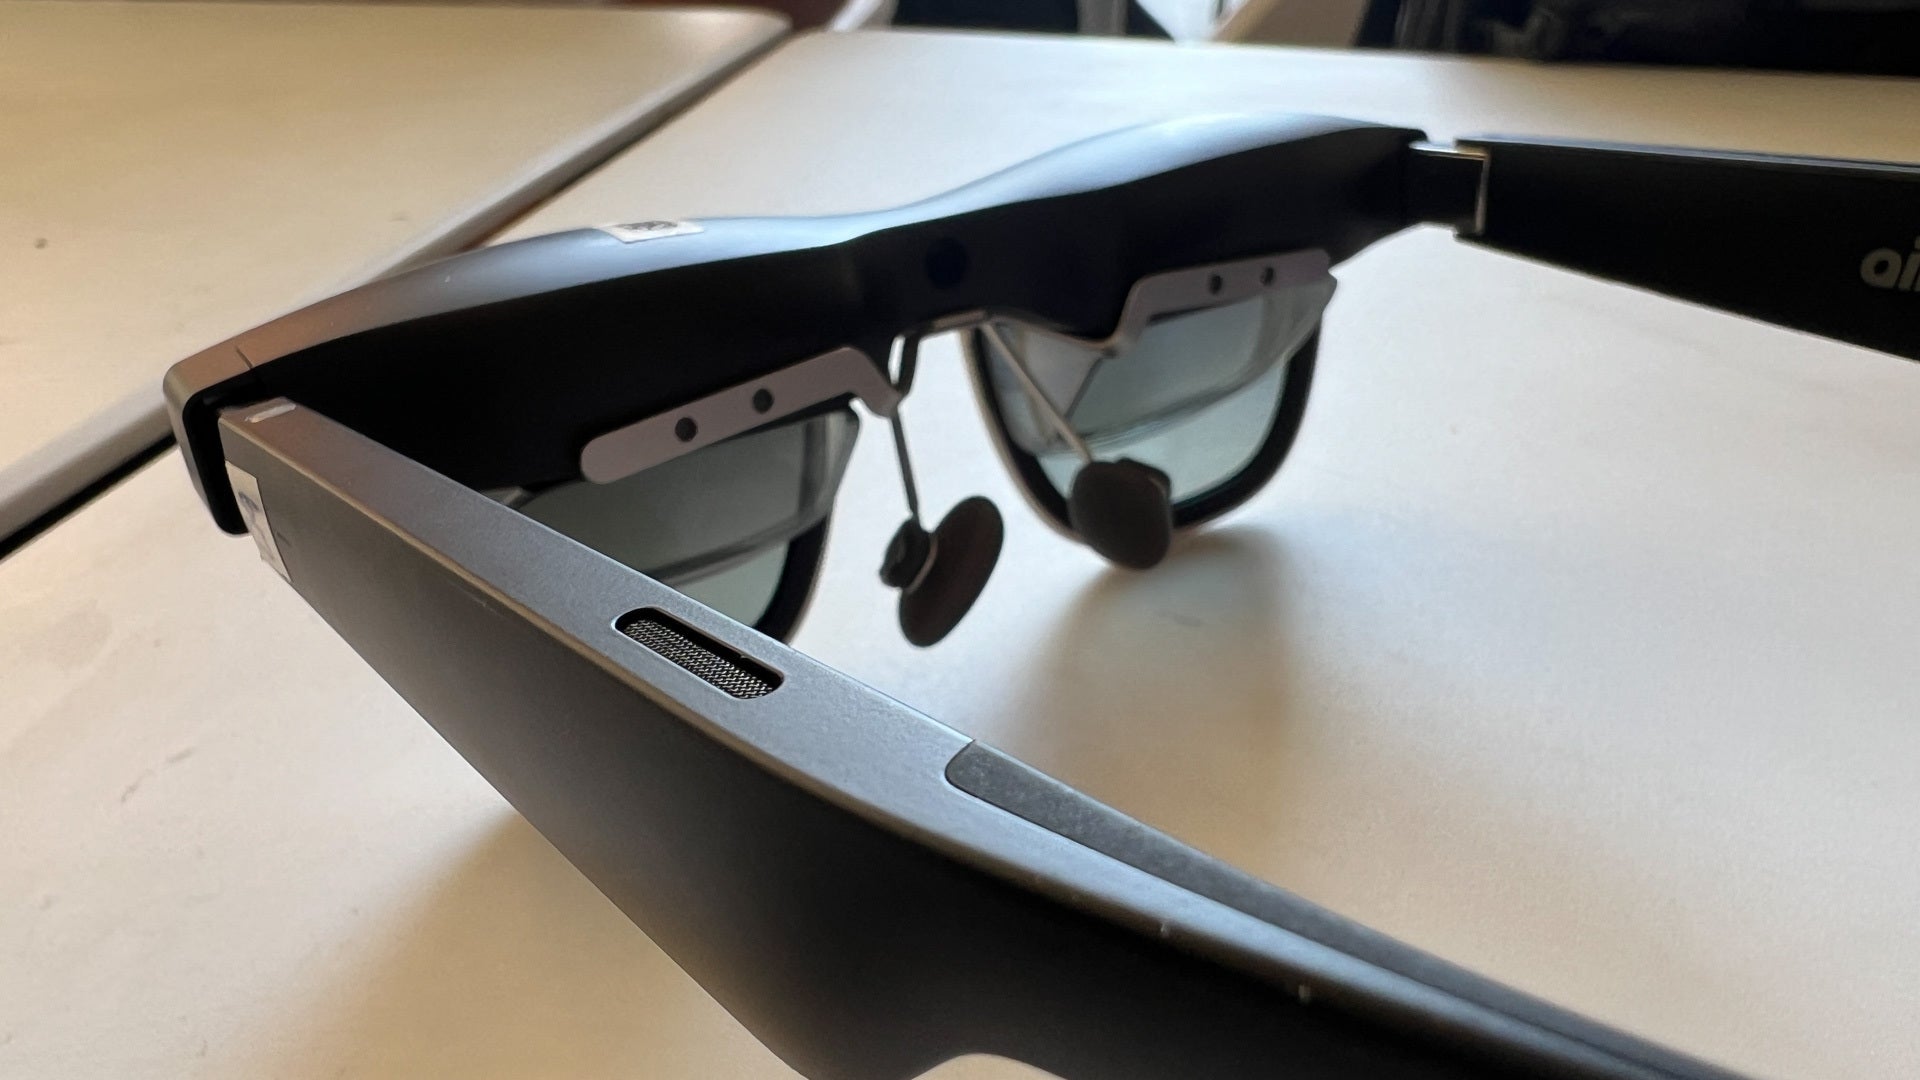 Flexible temples, soft nosepads, balanced (light) weight distribution – this is what advanced AR design is supposed to be (image credit - PhoneArena) - Xreal Air 2 Ultra preview: next-level AR experience